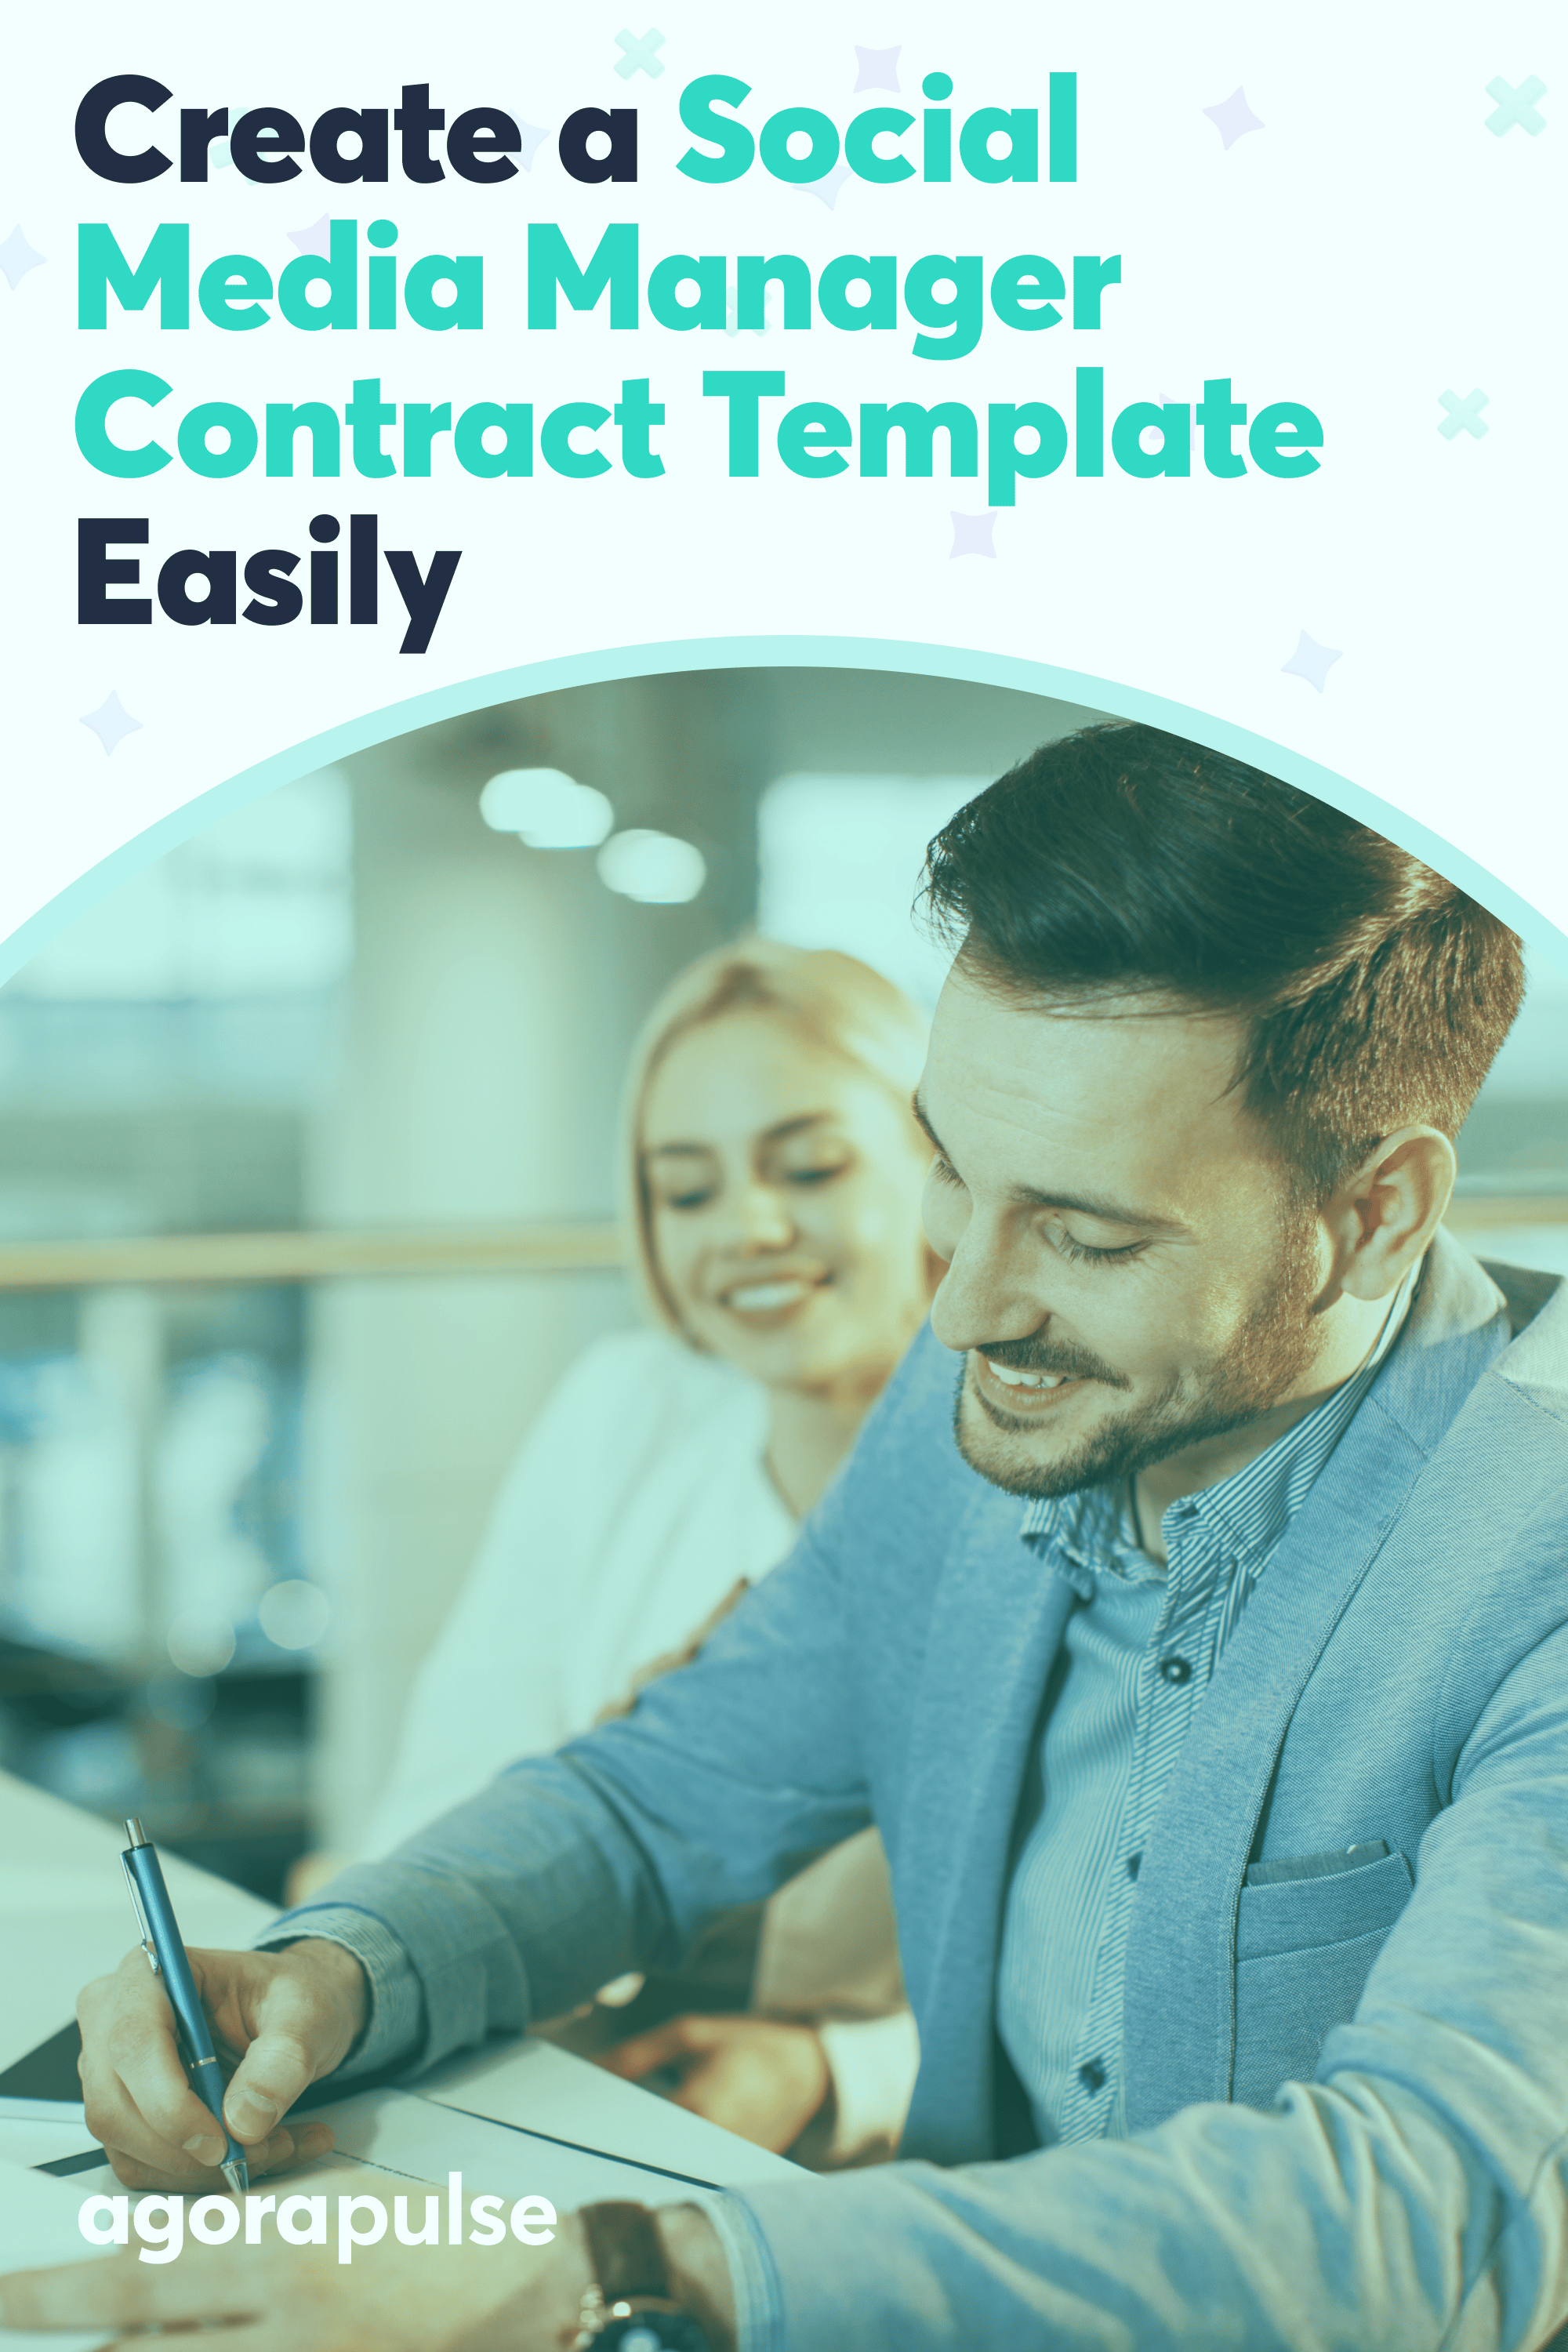 How to Create a Social Media Manager Contract Template in 7 Easy Steps